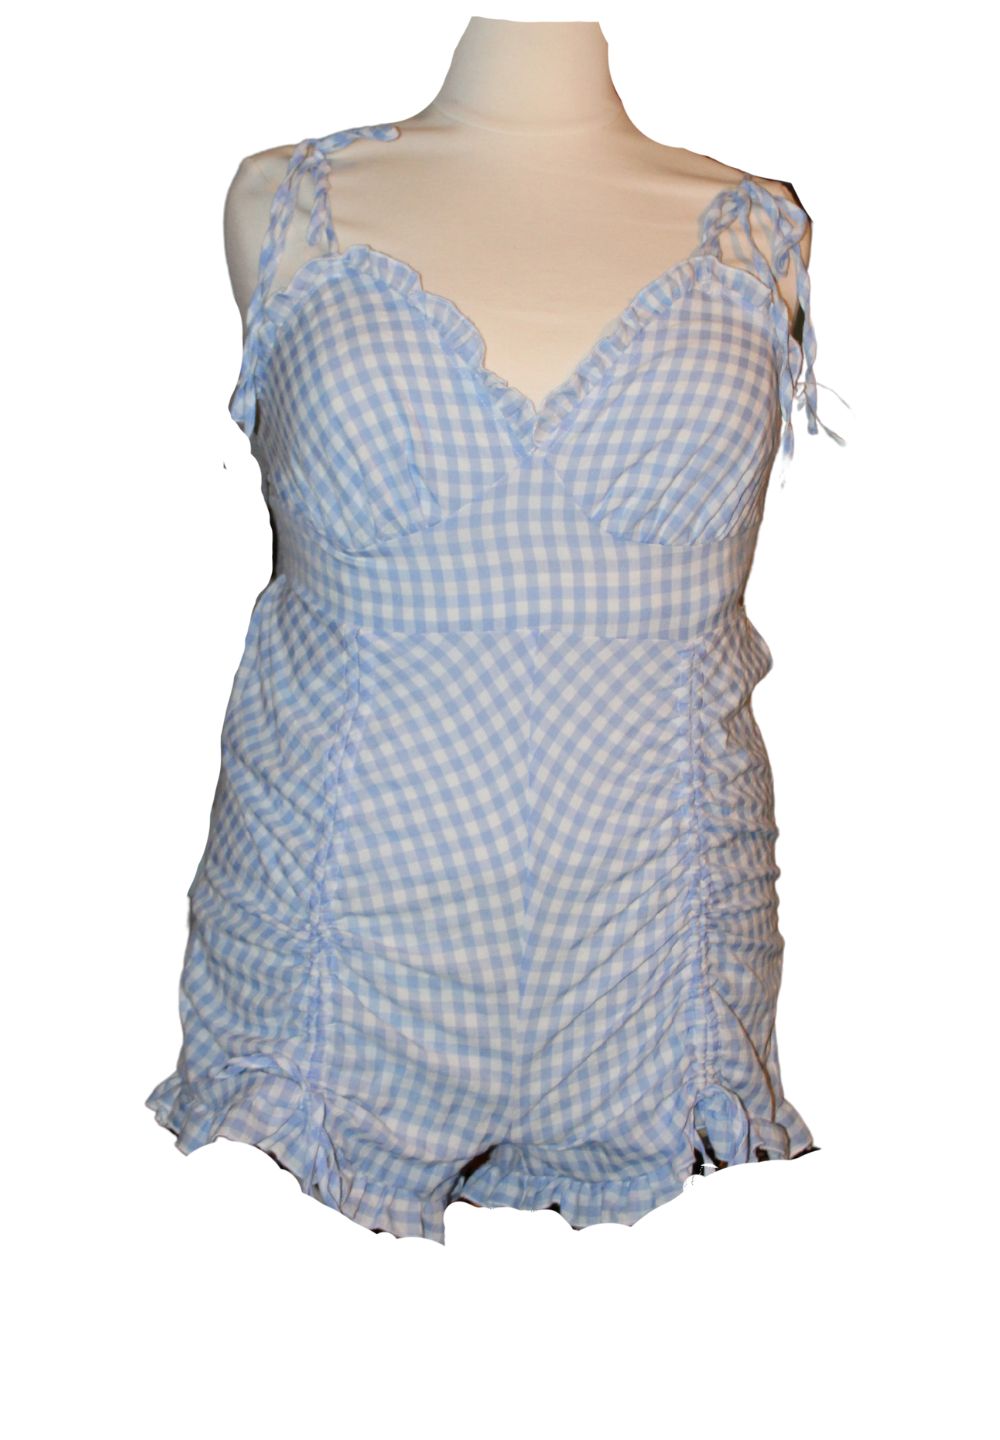 Shein Blue Gingham Rushed Romper, Size 1X